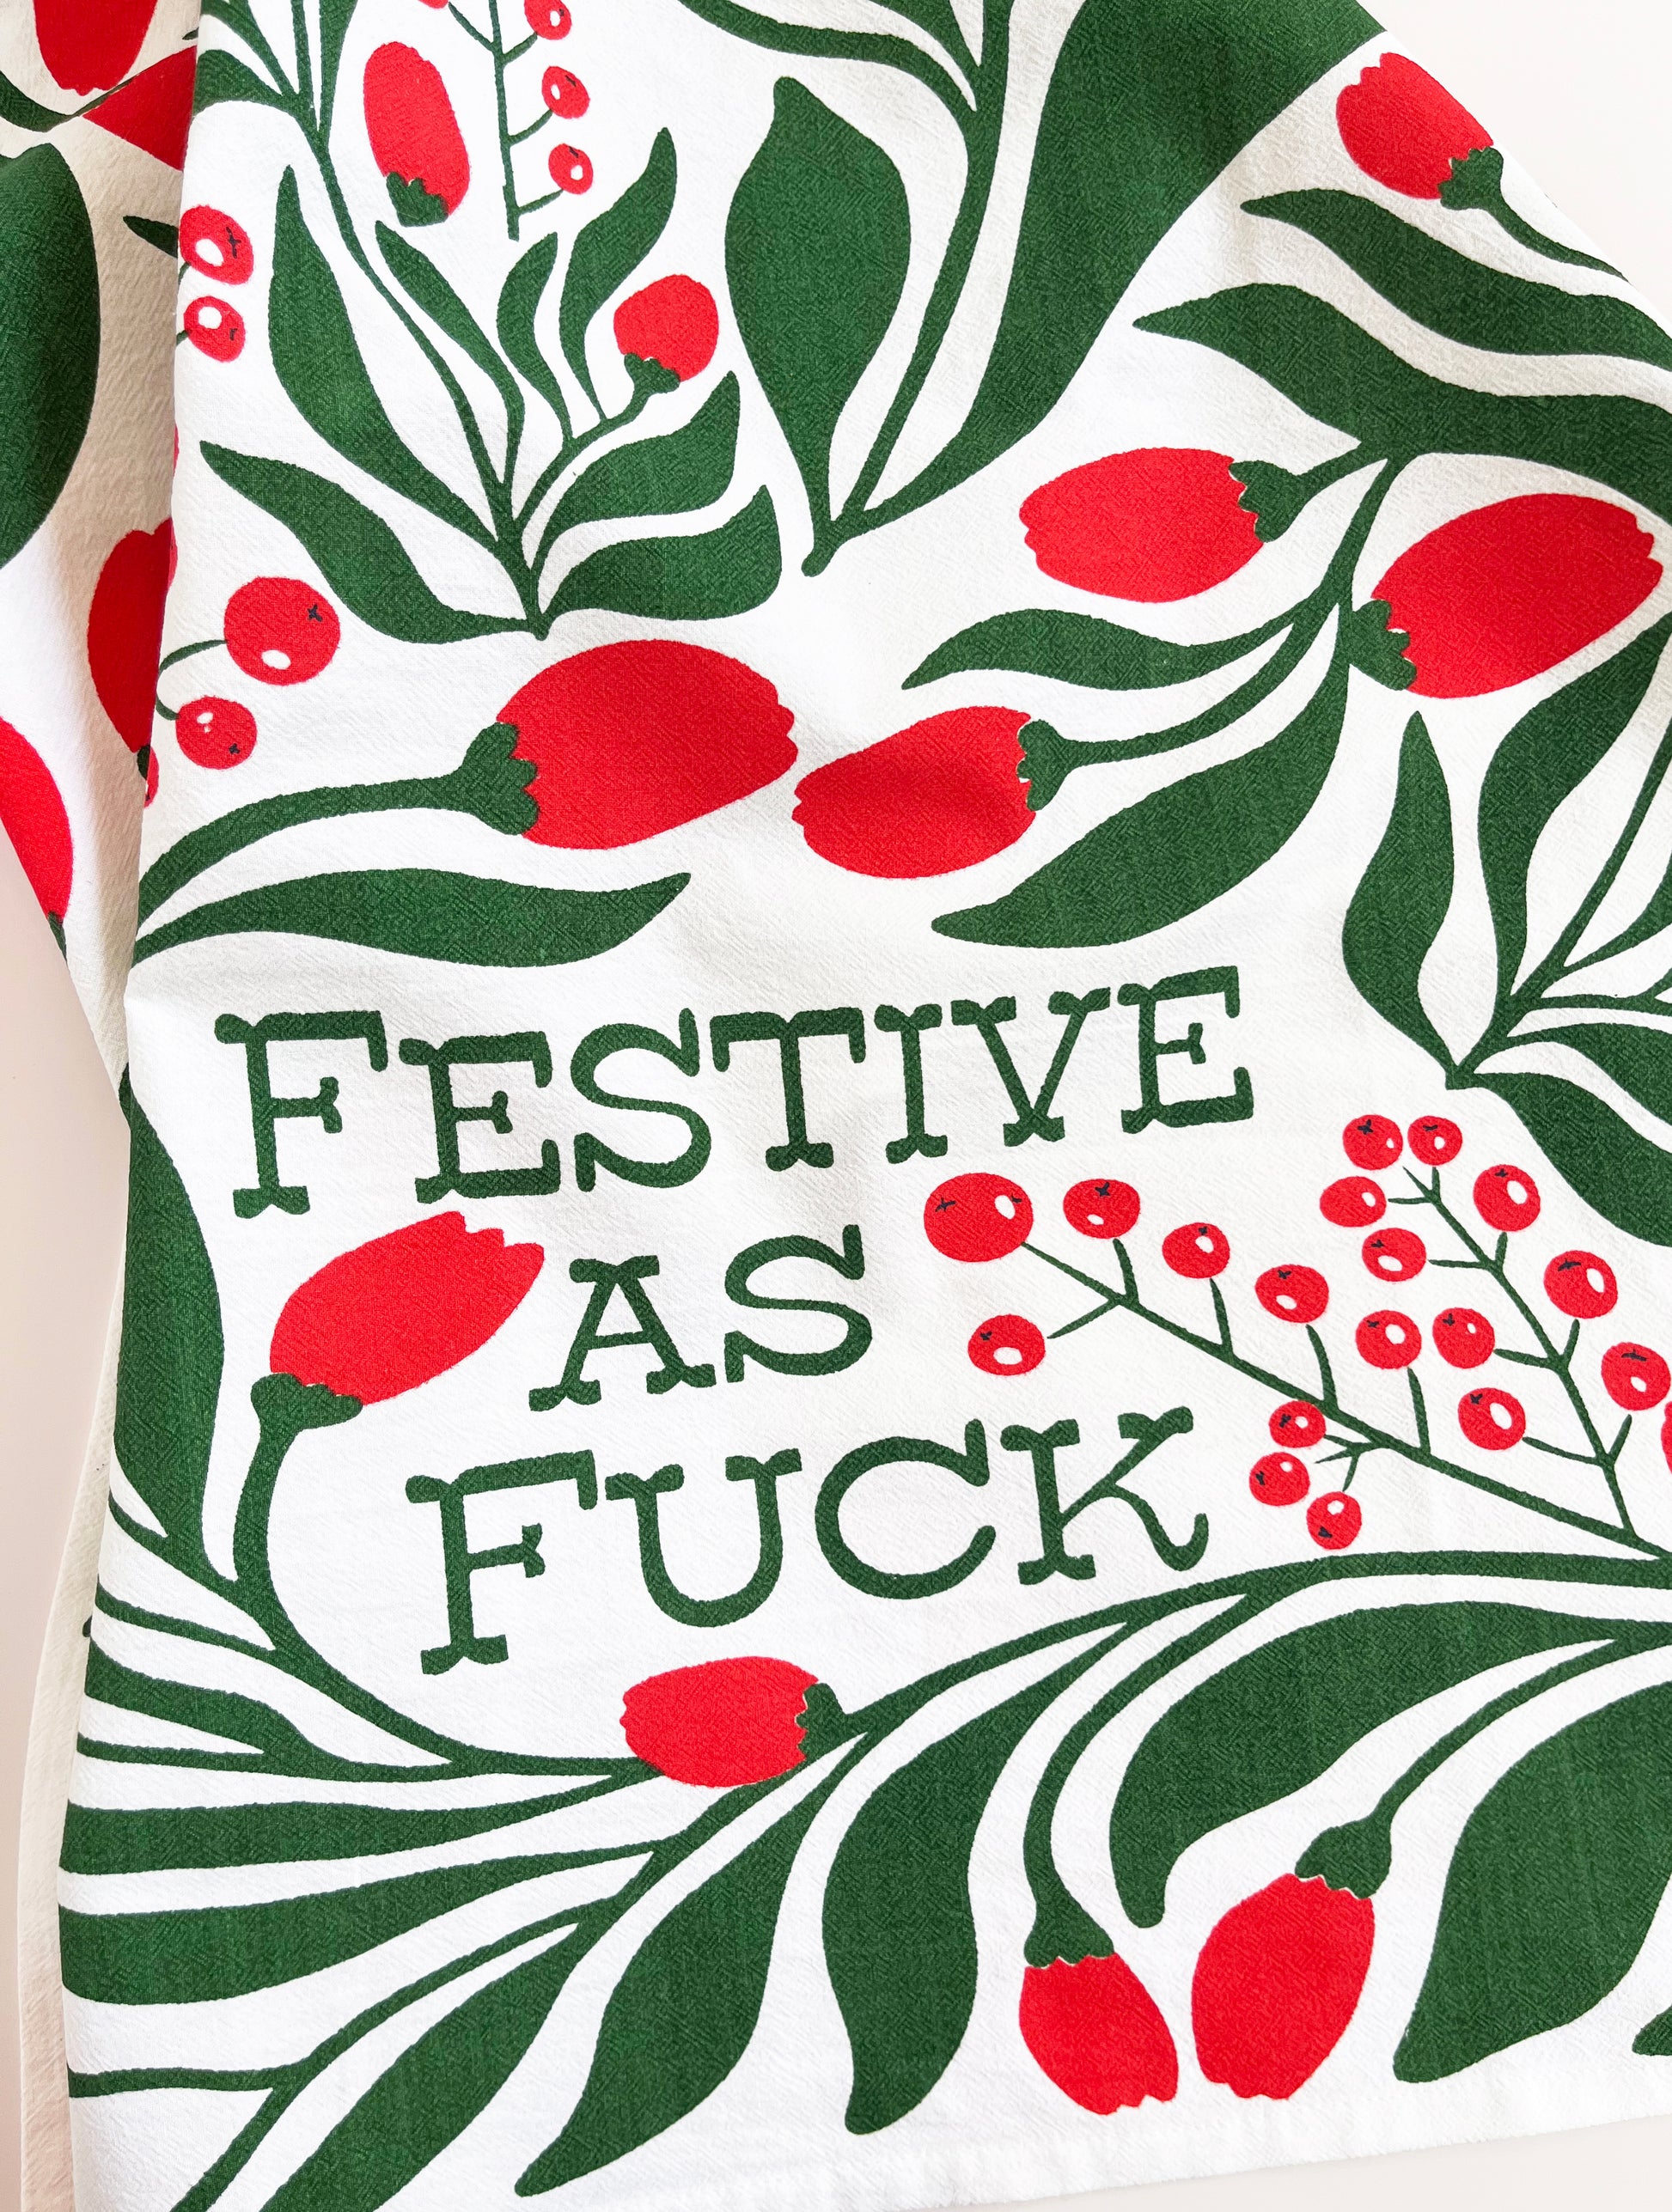 cute holiday tea towel red green vivid color flowers berries leaves festive as fuck gift coin laundry screen print 